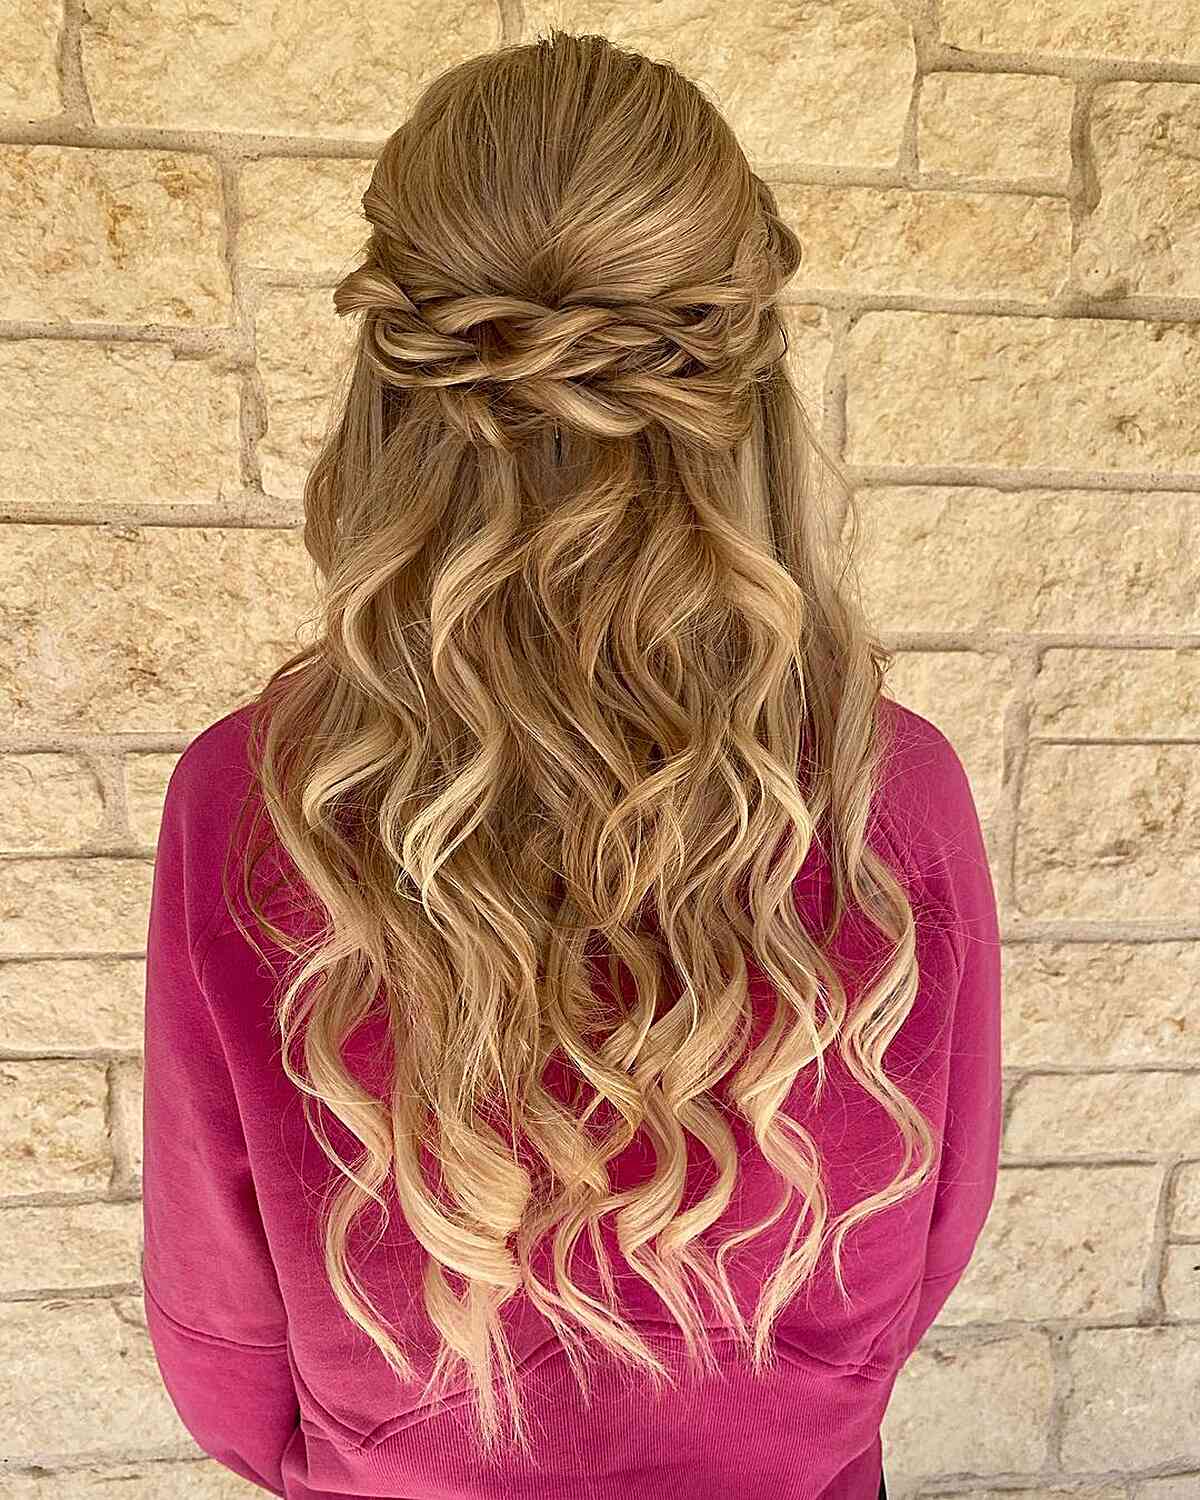 Half-up Double Dutch Braids with Loose Waves for Prom Night